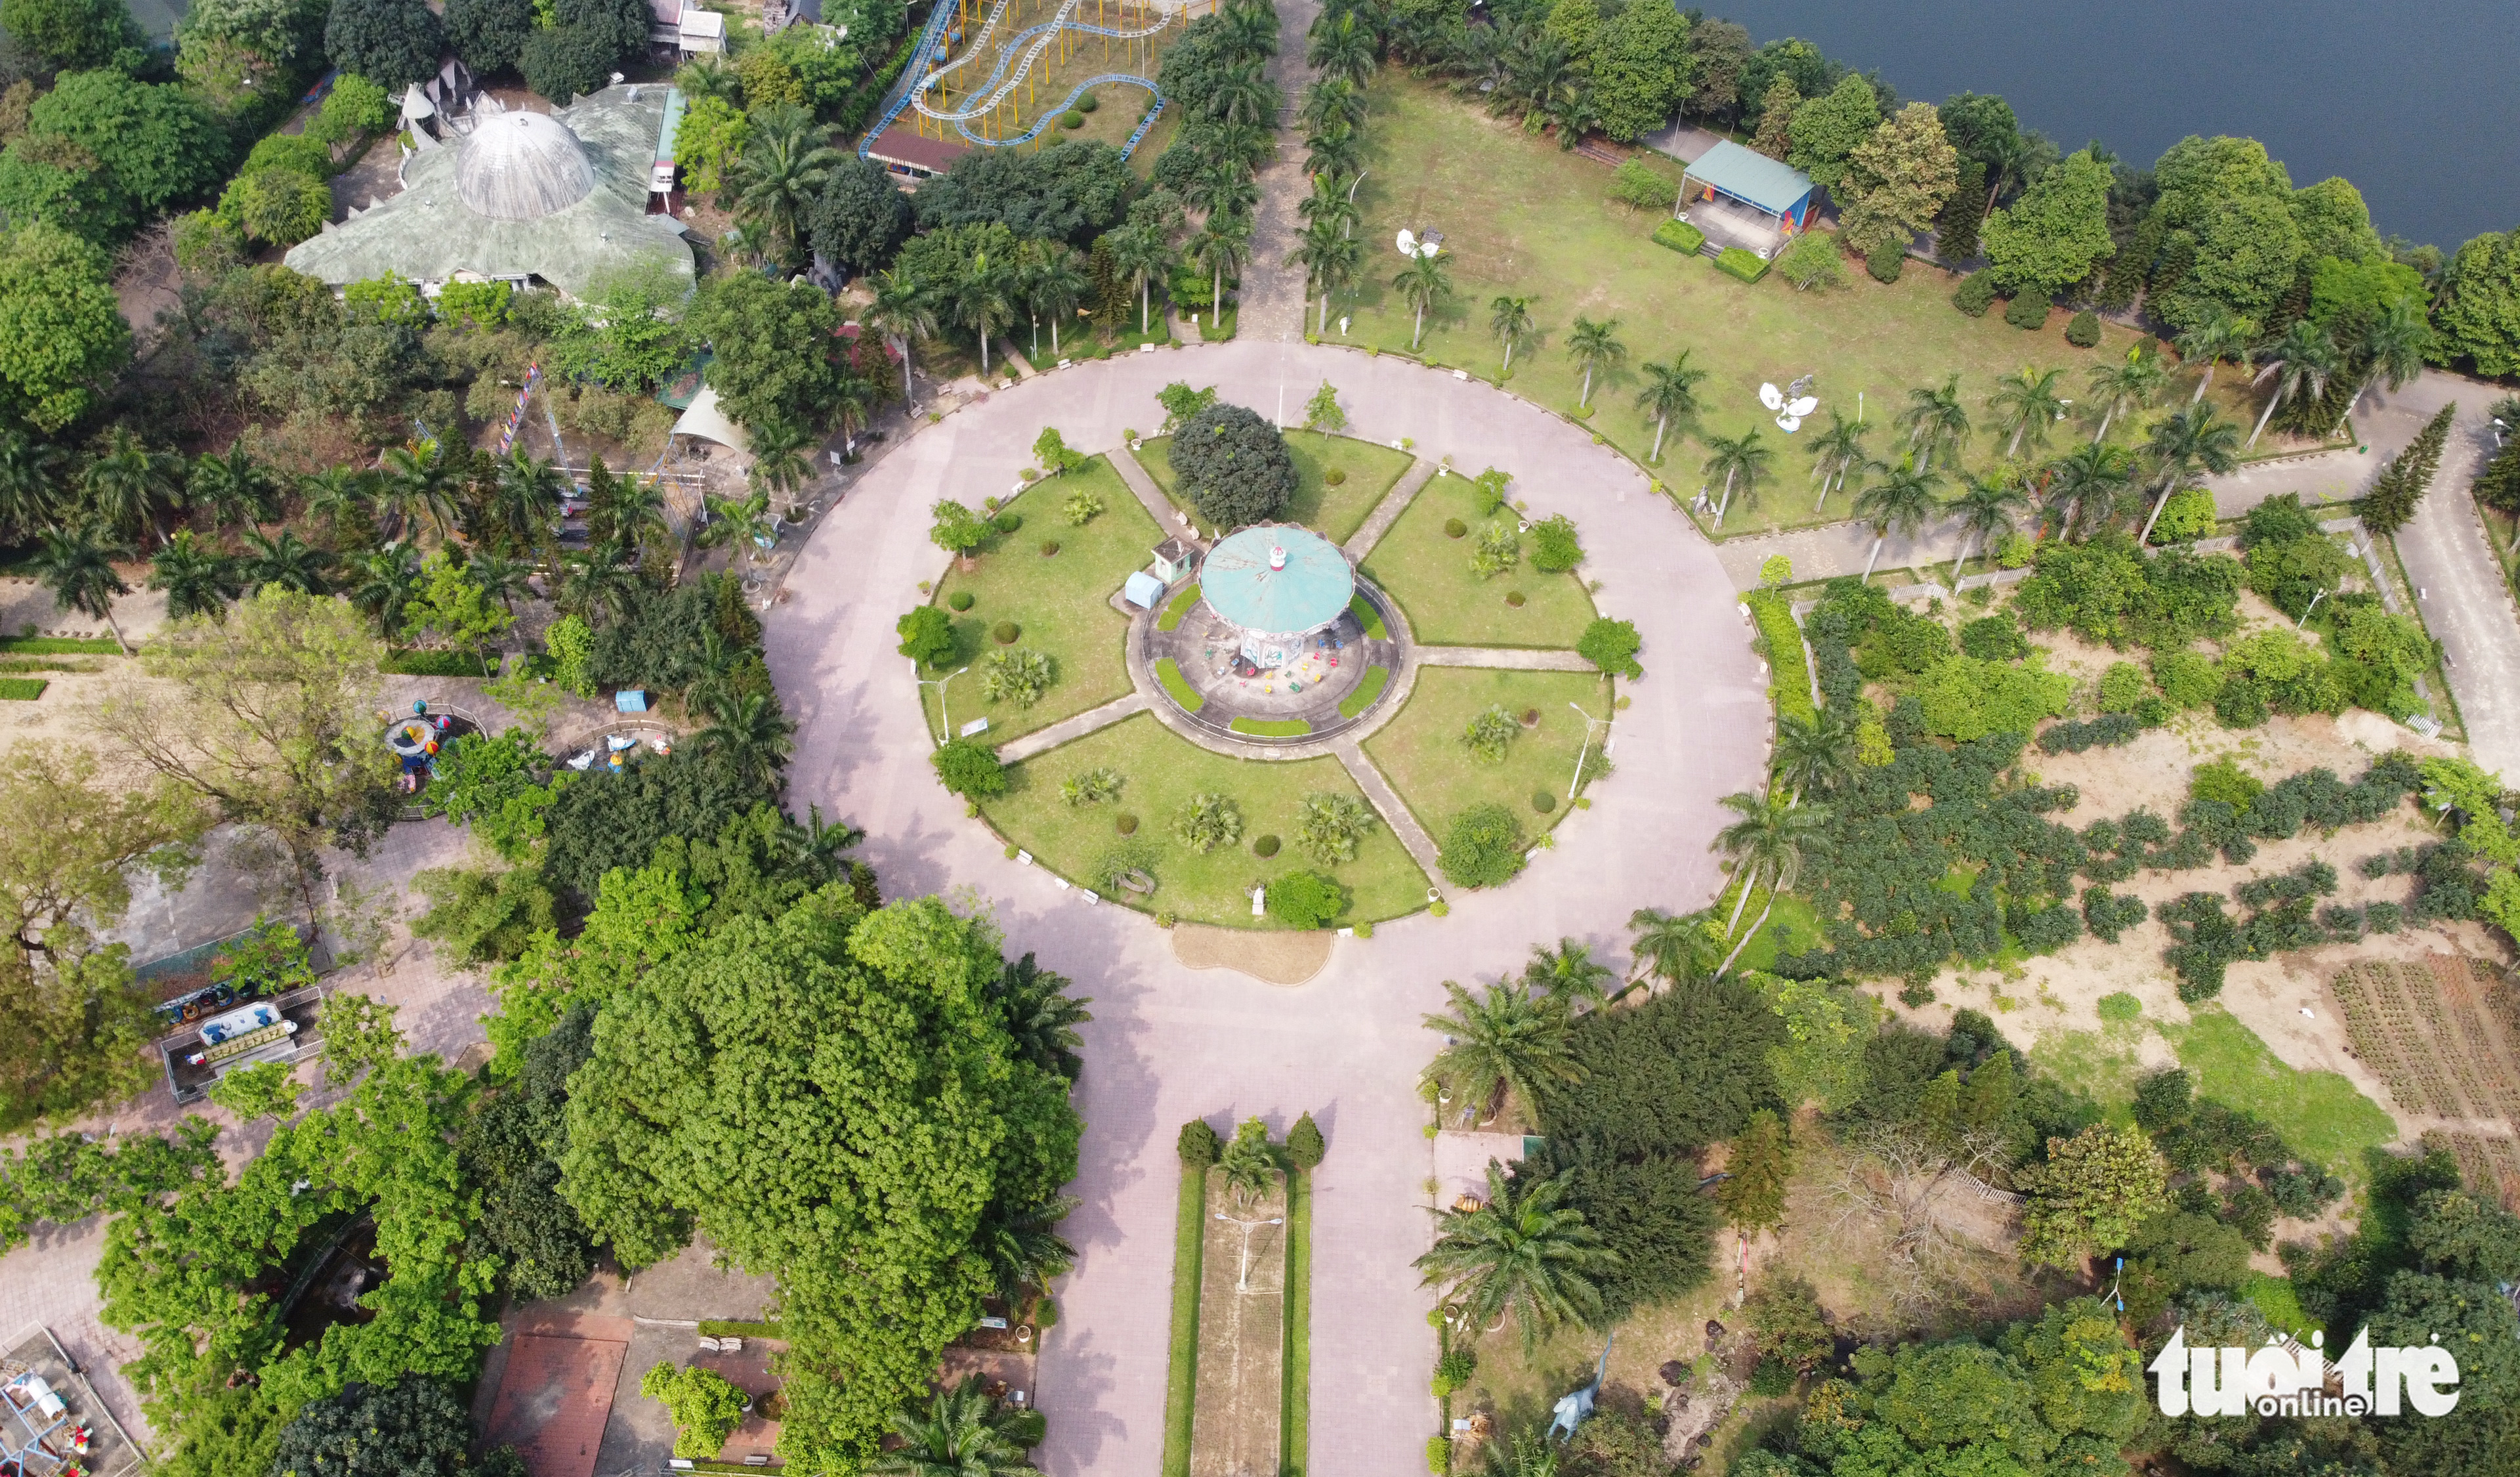 A bird’s-eye view of the Vinh City central park in the heart of Vinh City in Nghe An Province, Vietnam. Photo: Doan Hoa / Tuoi Tre